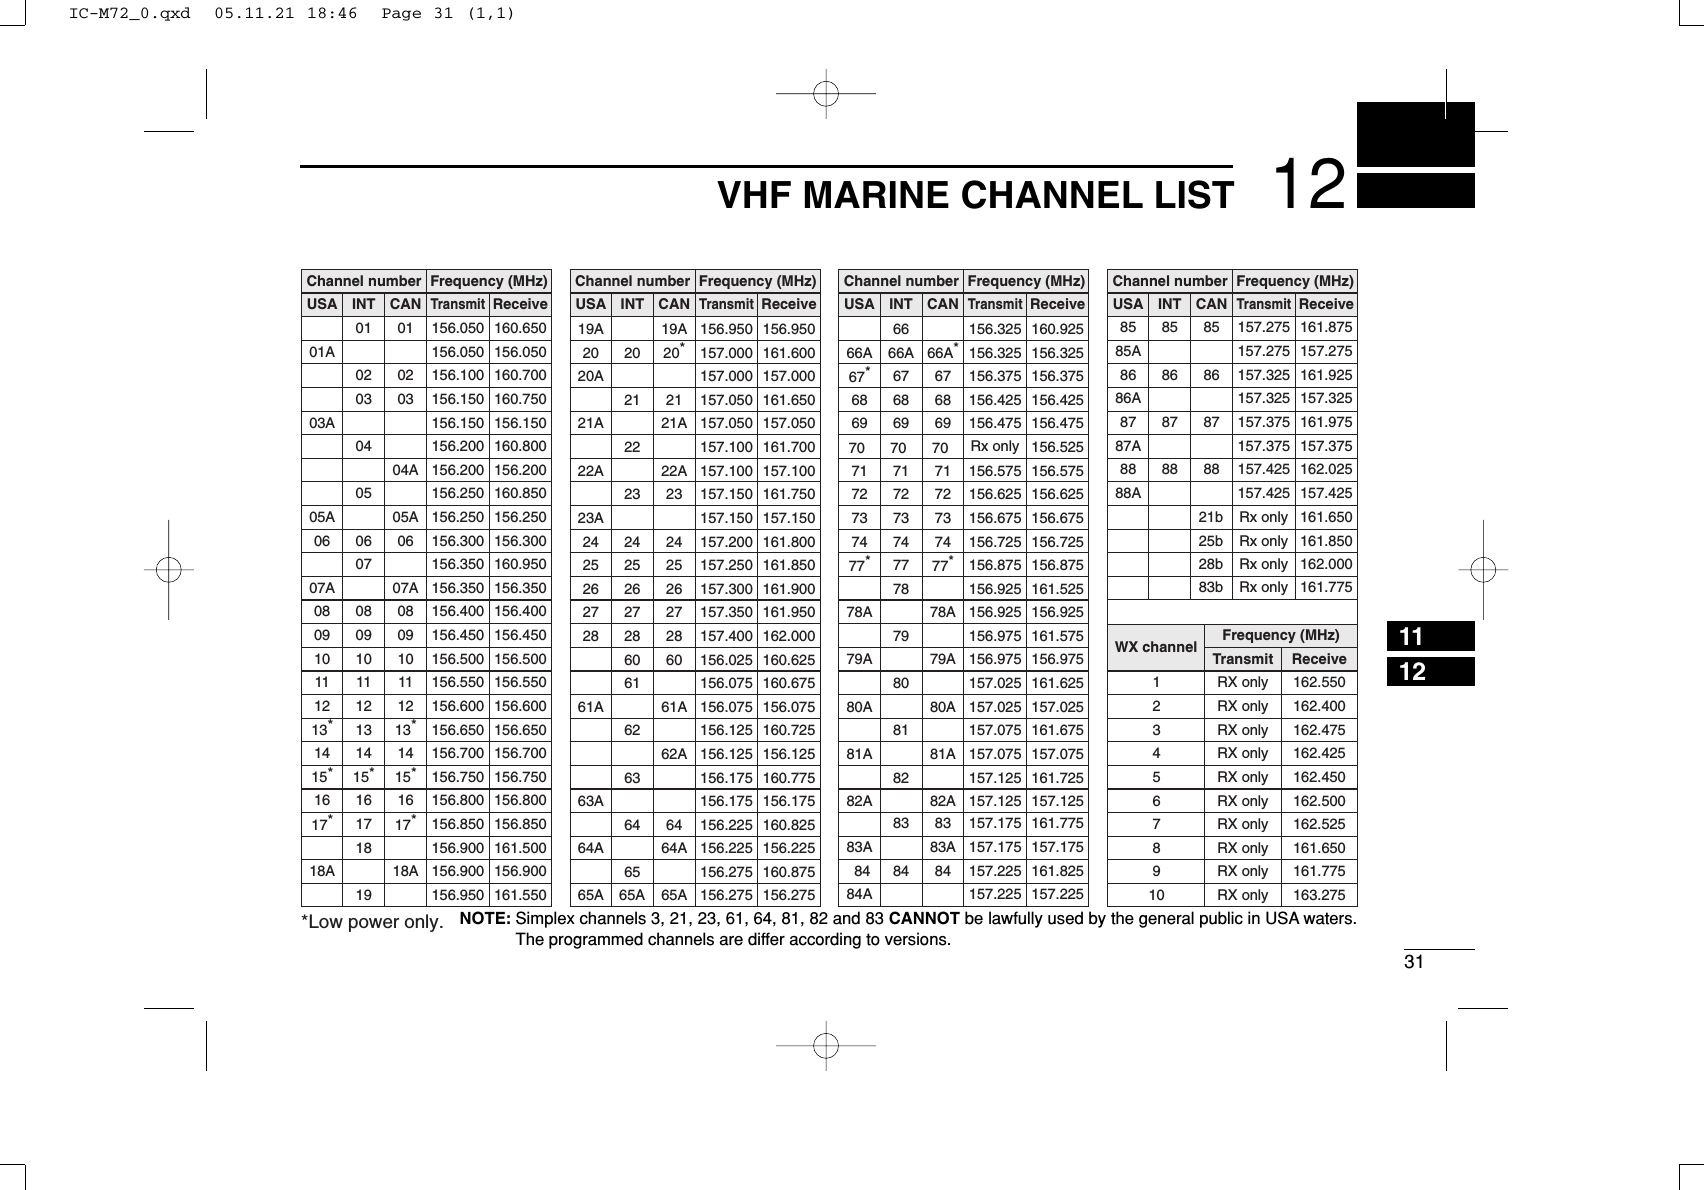 3112VHF MARINE CHANNEL LIST1112Channel numberUSA CANTransmitReceiveFrequency (MHz)INTChannel number Frequency (MHz)USA CANTransmitReceiveINTChannel number Frequency (MHz)USA CANTransmitReceiveINTChannel number Frequency (MHz)USA CANTransmitReceiveINTWX channel Frequency (MHz)Transmit Receive01 156.050 160.65001A 156.050 156.05002 156.100 160.70003 156.150 160.75003A 156.150 156.150156.200 160.80004A 156.200 156.200156.250 160.85005A 05A 156.250 156.25006 06 156.300 156.300156.350 160.95007A 07A 156.350 156.35008 08 156.400 156.40009 09 156.450 156.45010 10 156.500 156.50011 11 156.550 156.55012 12 156.600 156.60013*13*156.650 156.65014 14 156.700 156.70015*15*156.750 156.75016 16 156.800 156.80017*17*156.850 156.850156.900 161.50018A 18A 156.900 156.900010203040506070809101112131415*161718156.950 161.55019A 19A 156.950 156.95020 20*157.000 161.60021 157.050 161.65021A 21A 157.050 157.050157.100 161.70022A 22A 157.100 157.10023 157.150 161.75023A 157.150 157.15024 24 157.200 161.80025 25 157.250 161.85026 26 157.300 161.90027 27 157.350 161.95028 28 157.400 162.00060 156.025 160.625156.075 160.67561A 61A 156.075 156.075156.125 160.72562A 156.125 156.125156.175 160.77563A 156.175 156.17564 156.225 160.82564A 64A 156.225 156.22519202122232425262728606162636420A 157.000 157.00066A 66A*156.325 160.92567*67 156.375 156.37568 68 156.425 156.42569 69 156.475 156.47570 70 156.52571 71 156.575 156.57572 72 156.625 156.62573 73 156.675 156.67574 74 156.725 156.72577*77*156.875 156.875156.925 161.52578A 78A 156.925 156.925156.975 161.57579A 79A 156.975 156.975157.025 161.62580A 80A 157.025 157.025157.075 161.67581A 81A 157.075 157.075157.125 161.72582A 82A 157.125 157.125666768697071727374777879808182156.325 156.32566A85 85 157.275 161.87585A 157.275 157.27586 86 157.325 161.92586A 157.325 157.32587 87 157.375 161.97587A 157.375 157.37588 88 157.425 162.02588A 157.425 157.4258586878821b Rx onlyRx only161.65025b Rx only 161.85028b Rx only 162.00083b Rx only 161.77541 RX only 162.5502 RX only 162.4003 RX only 162.4755 RX only 162.4506 RX only 162.5007 RX only 162.5258 RX only 161.6509 RX only 161.77510 RX only 163.275RX only 162.425156.275 160.87565A 65A 156.275 156.2756565A 84A83 157.175 161.77583A 83A 157.175 157.17584 84 157.225 161.8258384157.225 157.225*Low power only.NOTE: Simplex channels 3, 21, 23, 61, 64, 81, 82 and 83 CANNOT be lawfully used by the general public in USA waters.The programmed channels are differ according to versions.IC-M72_0.qxd  05.11.21 18:46  Page 31 (1,1)